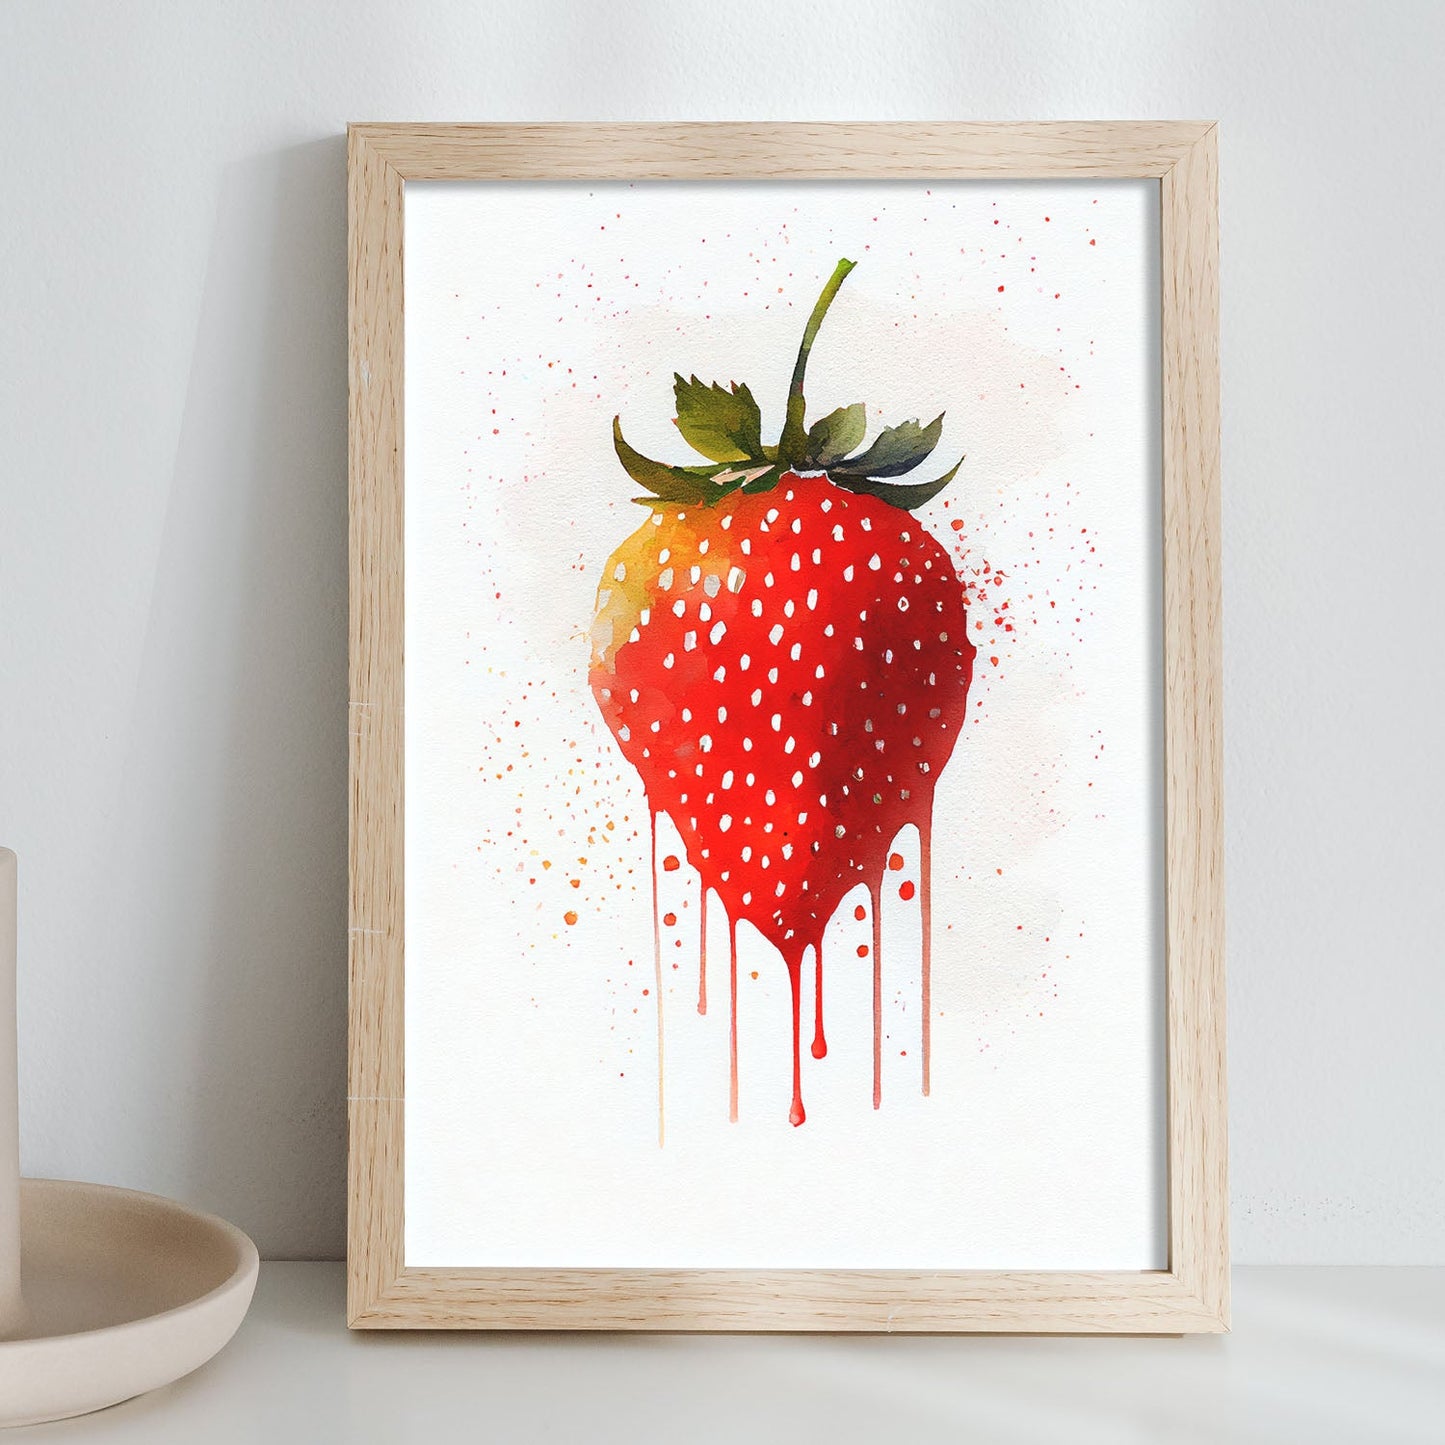 Nacnic minimalist Strawberry_2. Aesthetic Wall Art Prints for Bedroom or Living Room Design.